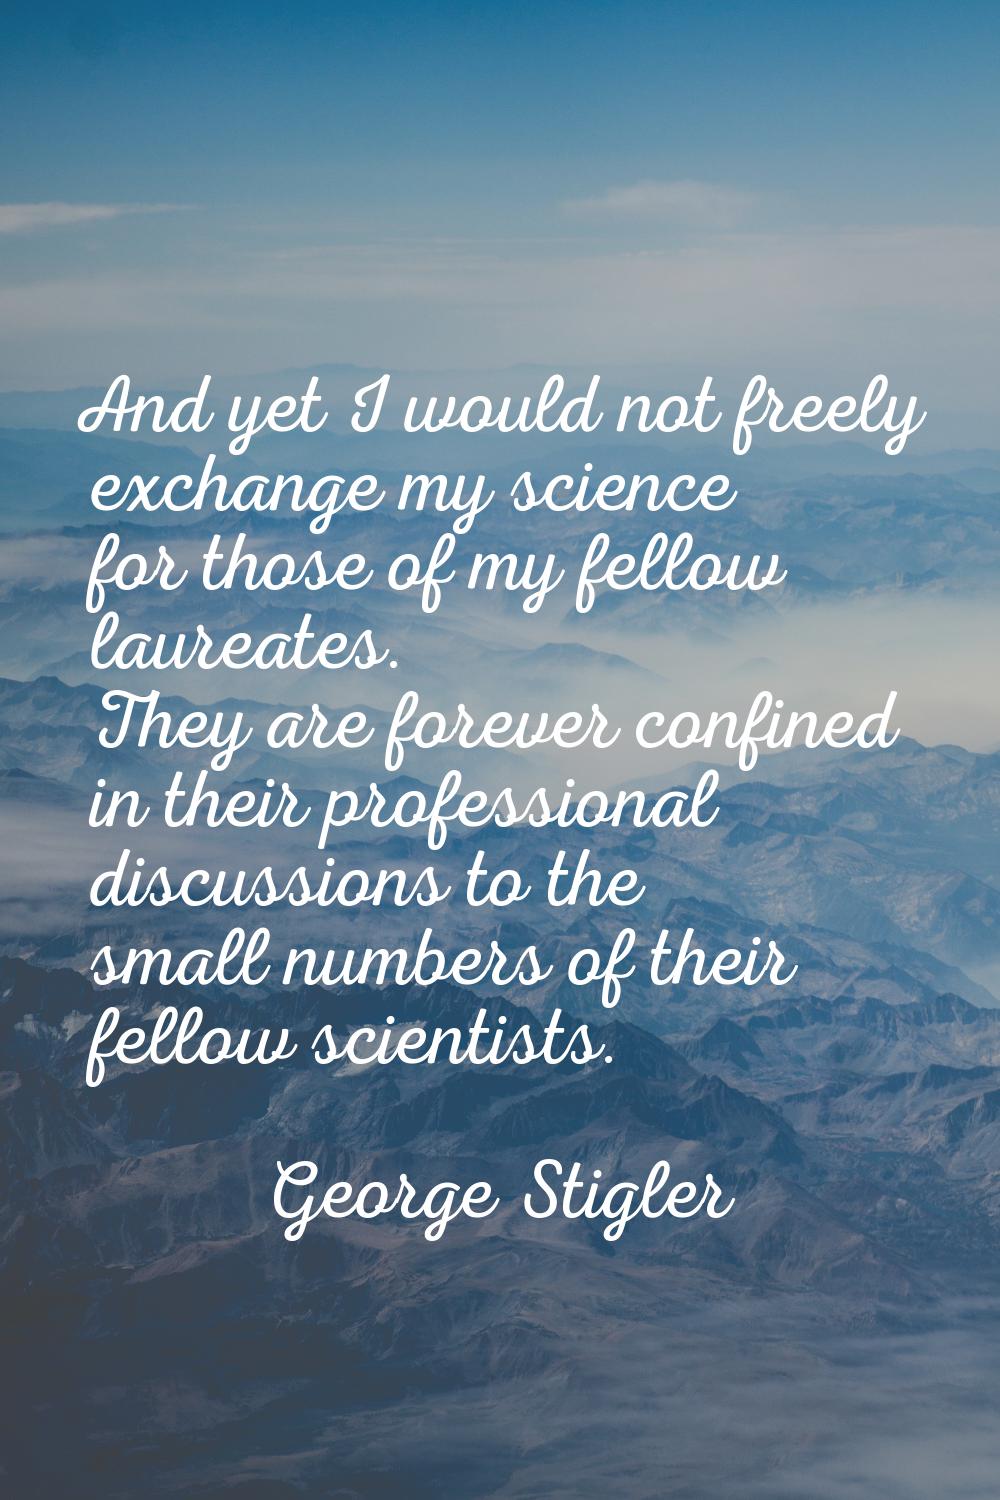 And yet I would not freely exchange my science for those of my fellow laureates. They are forever c